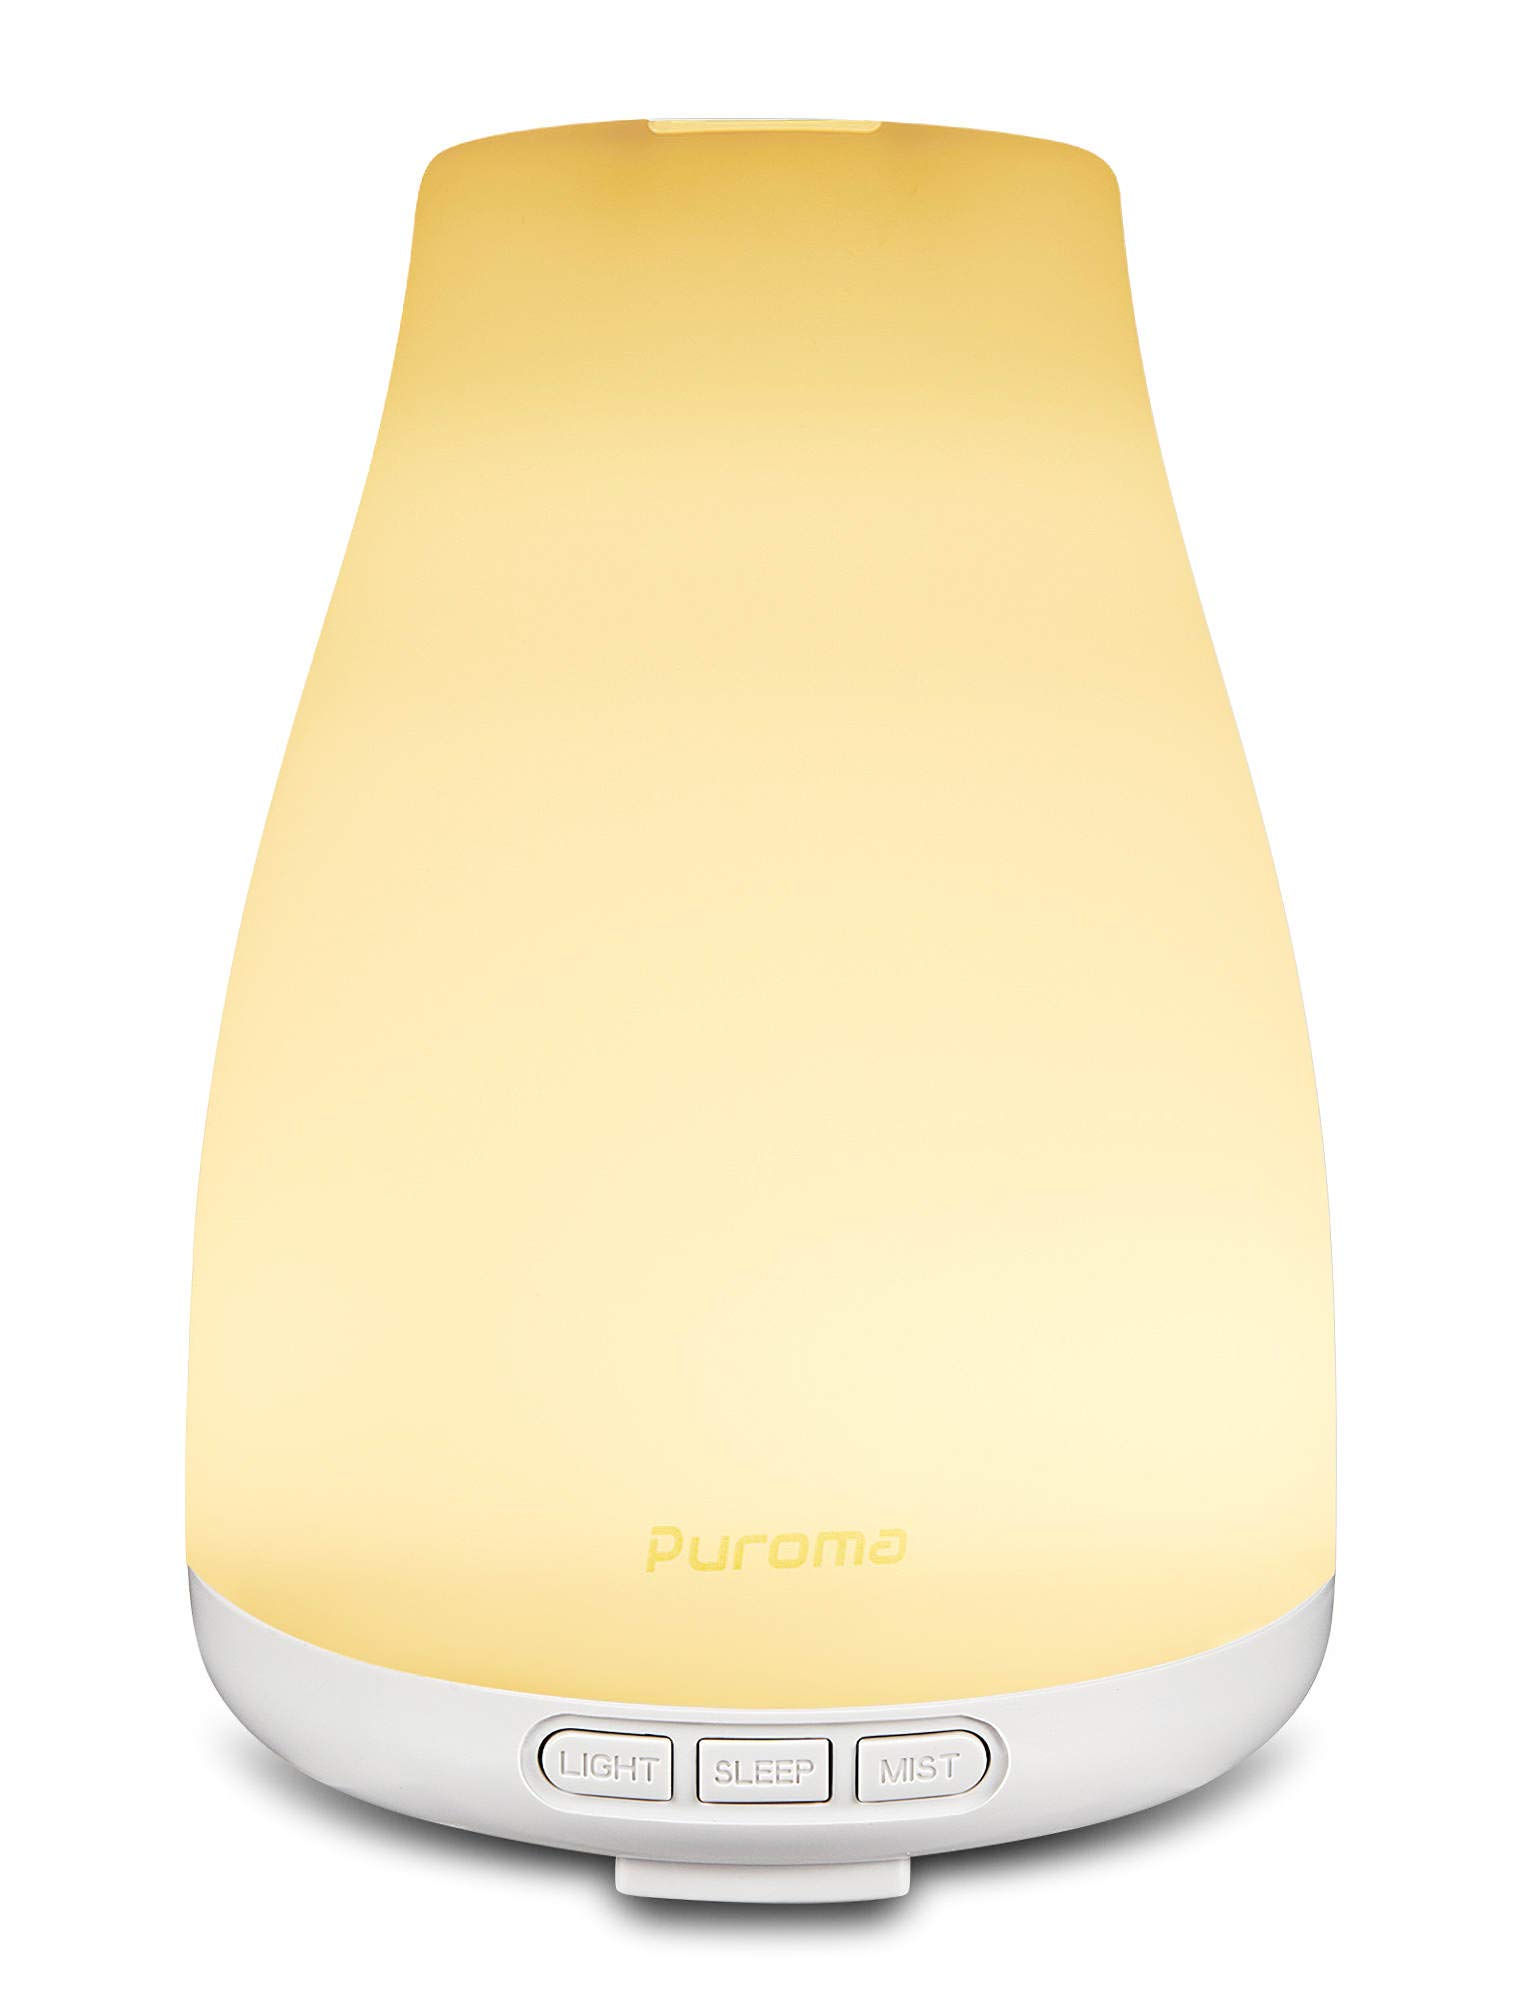 Puroma Upgrade Essential Oil Diffuser with Sleep Mode